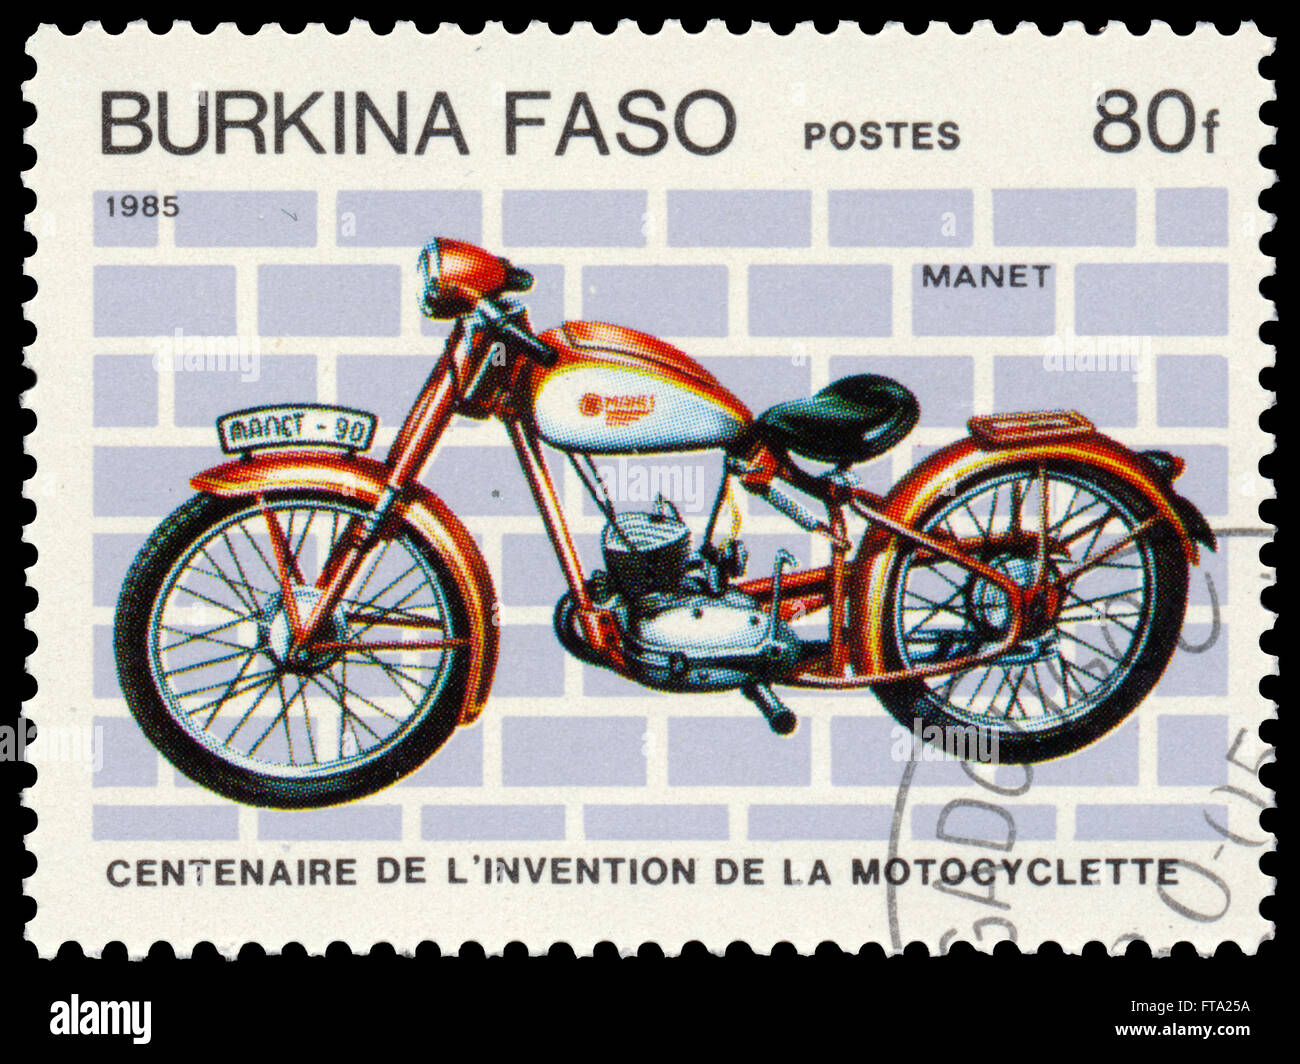 BUDAPEST, HUNGARY - 18 march 2016:  a stamp printed in Burkina Faso shows image of a vintage motorcycle, Manet, circa 1985 Stock Photo